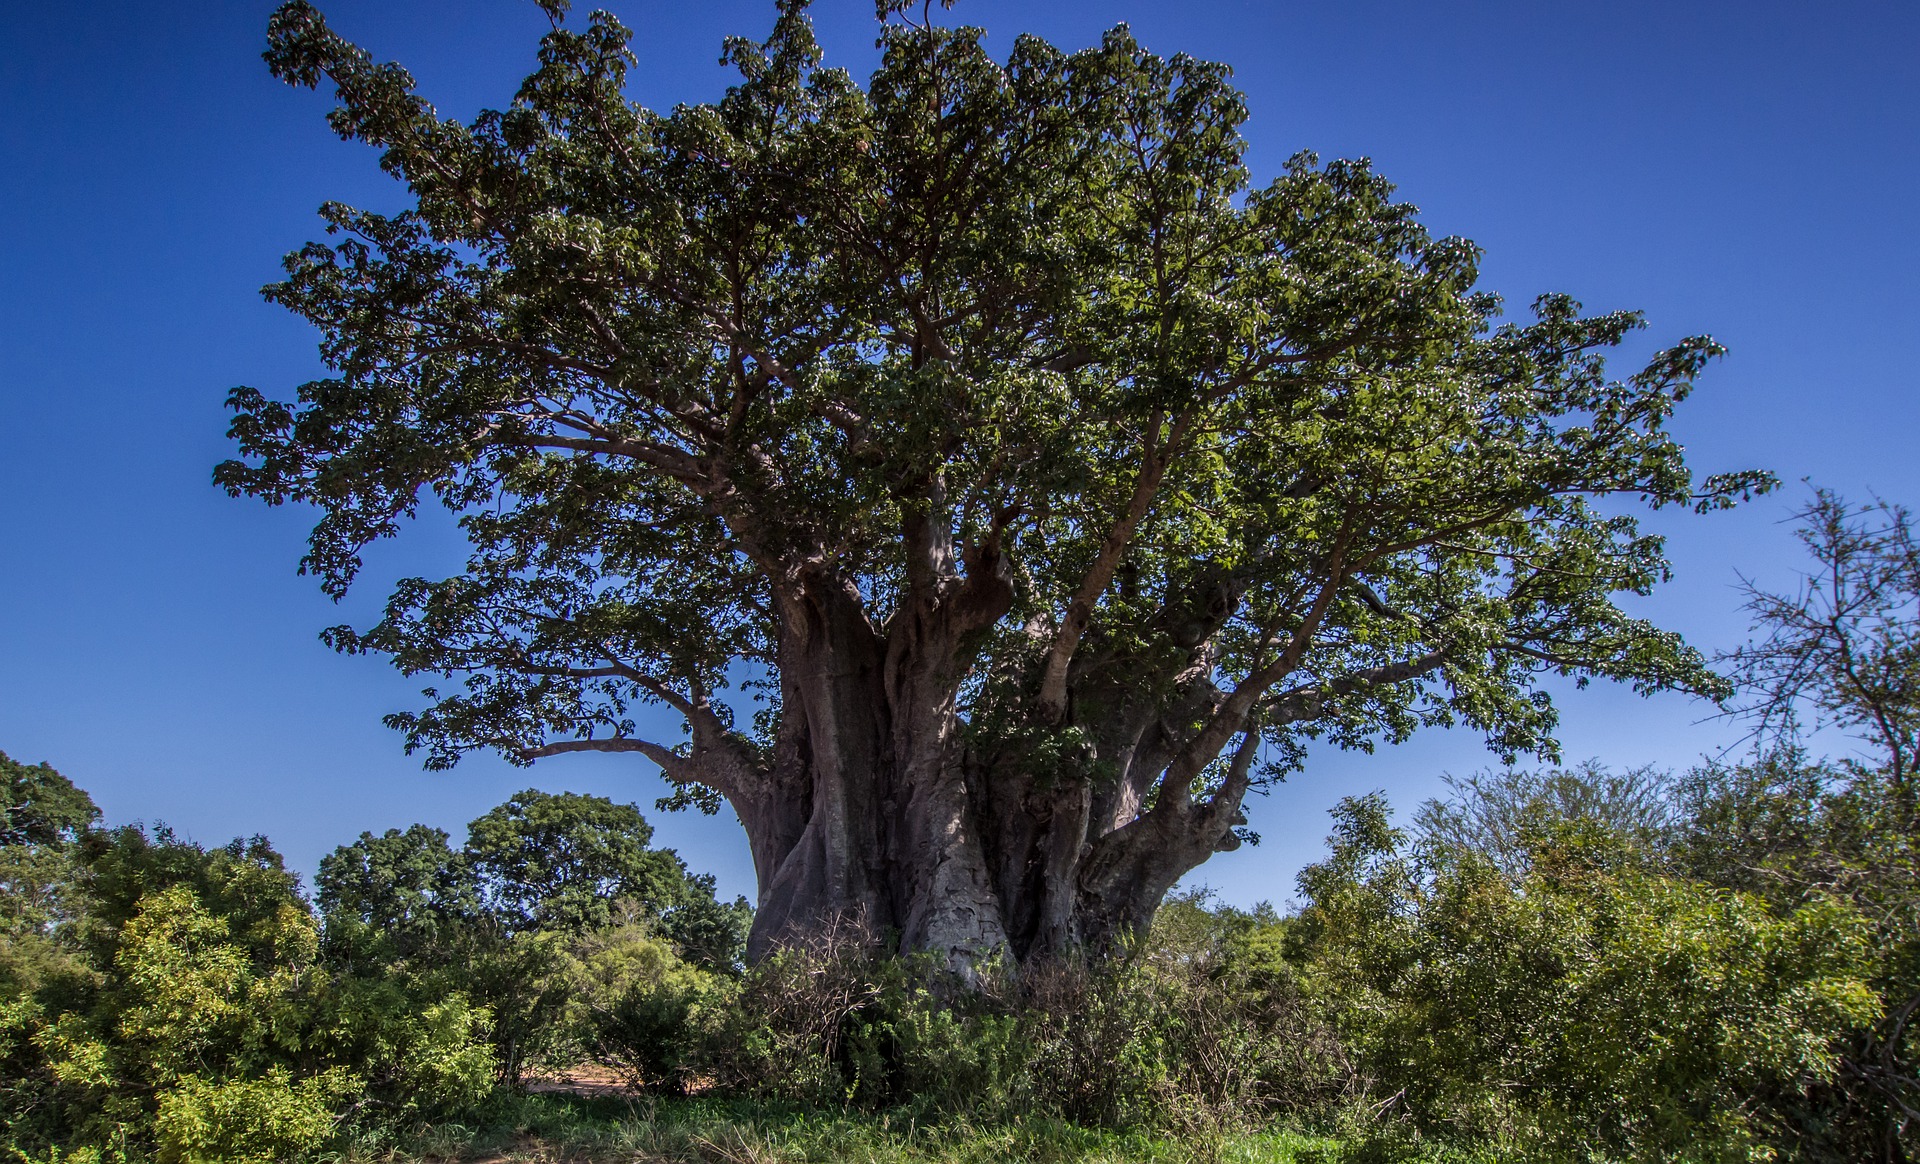 Flora of Tanzania - Baobab, the most iconic and of enormous proportions